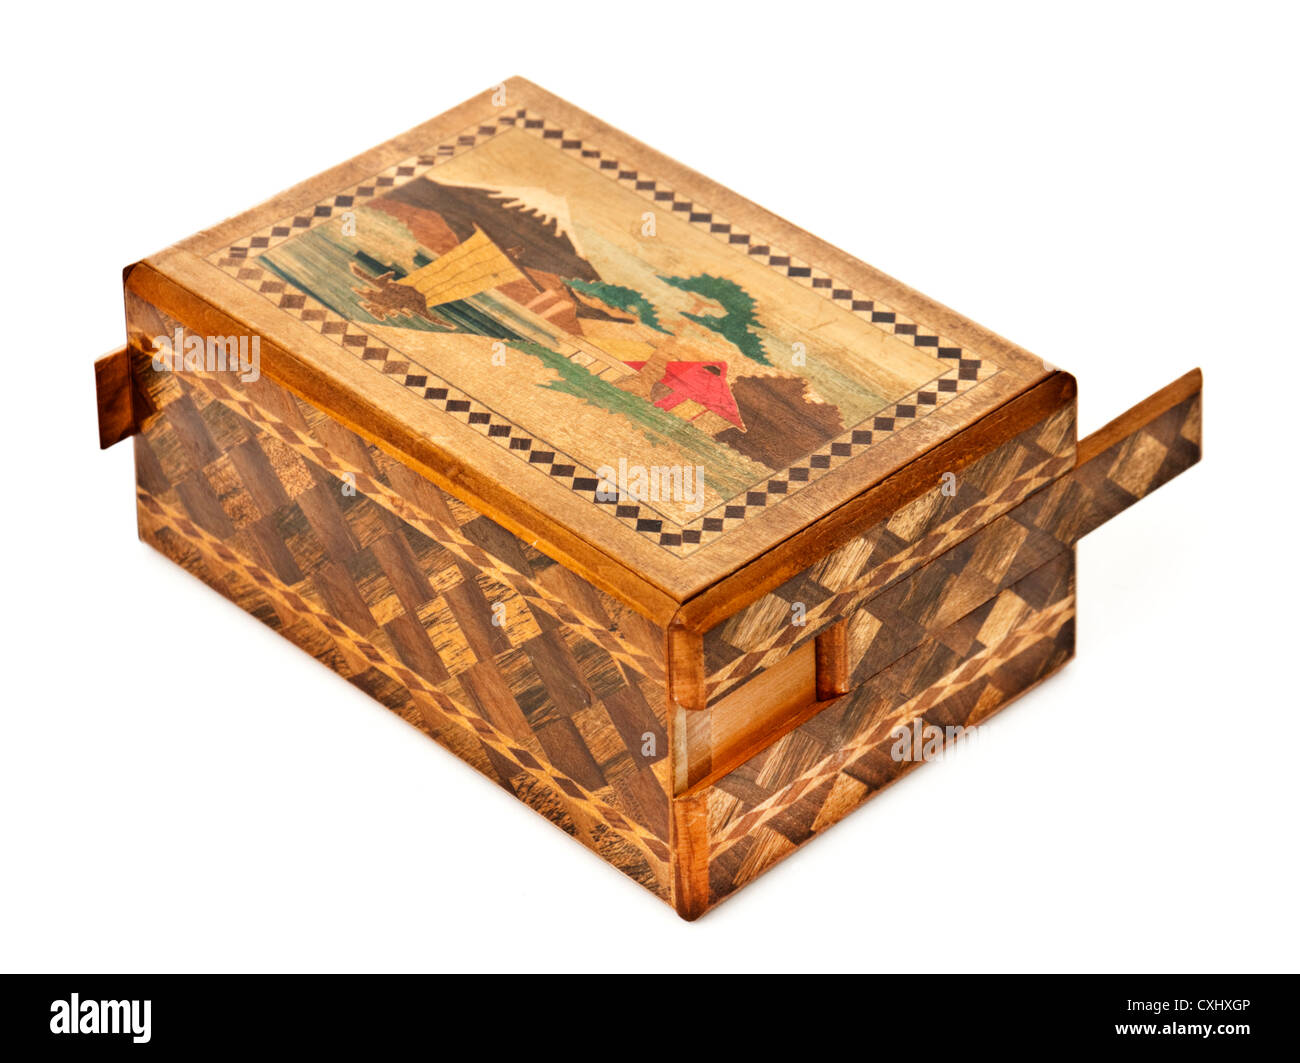 Chinese Wooden Puzzle Box High Resolution Stock Photography and Images